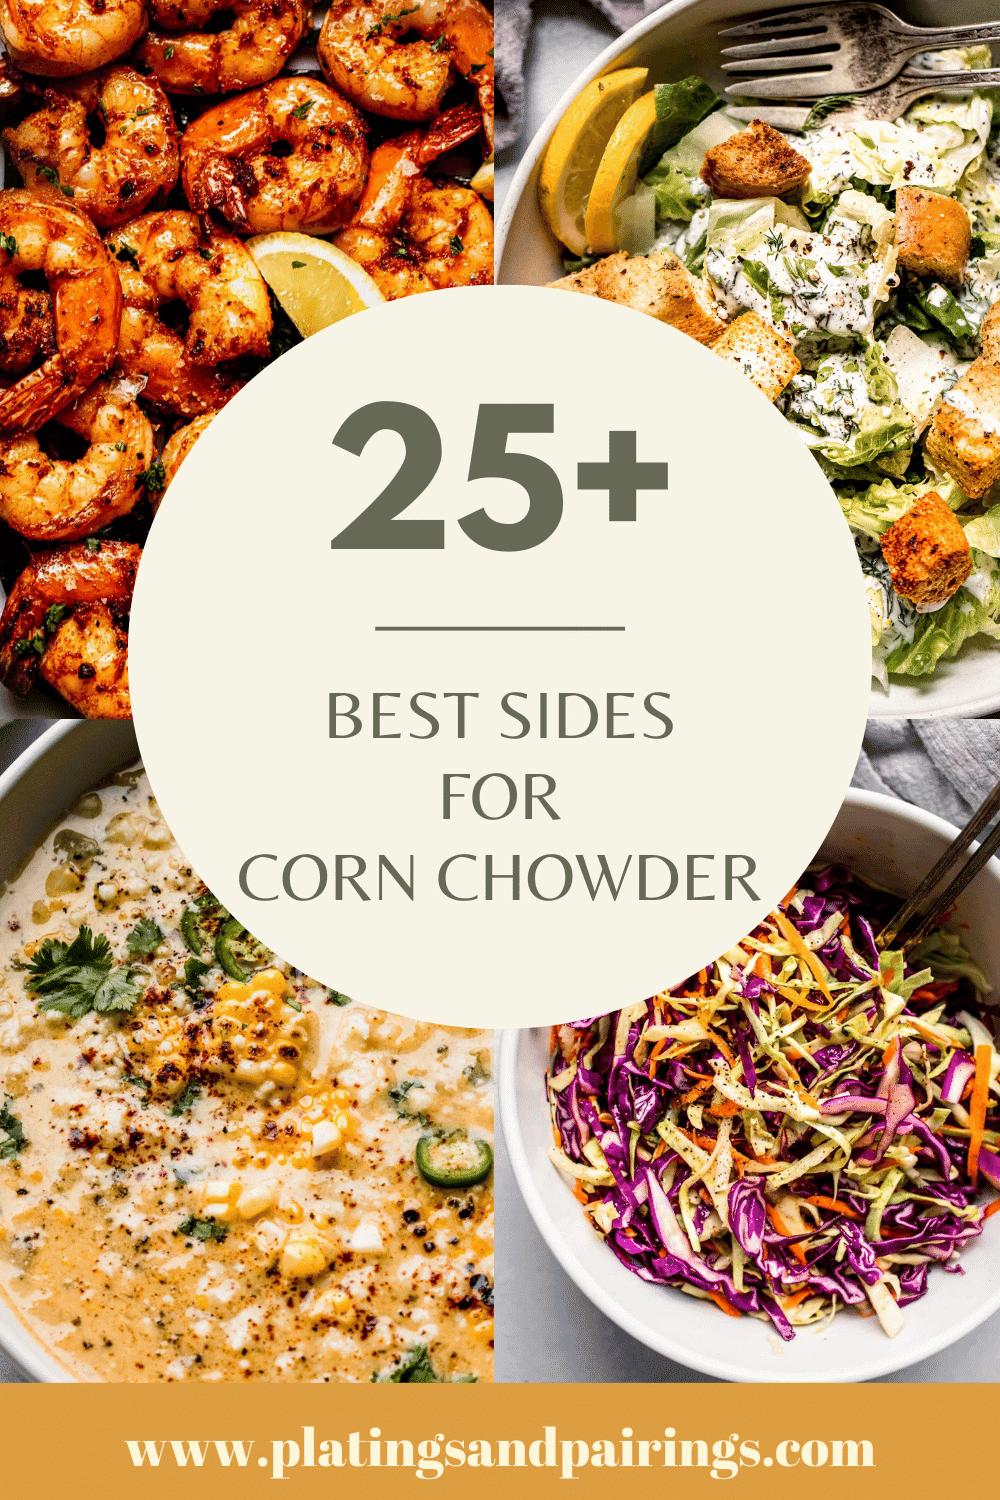 Collage of side dishes for corn chowder with text overlay.